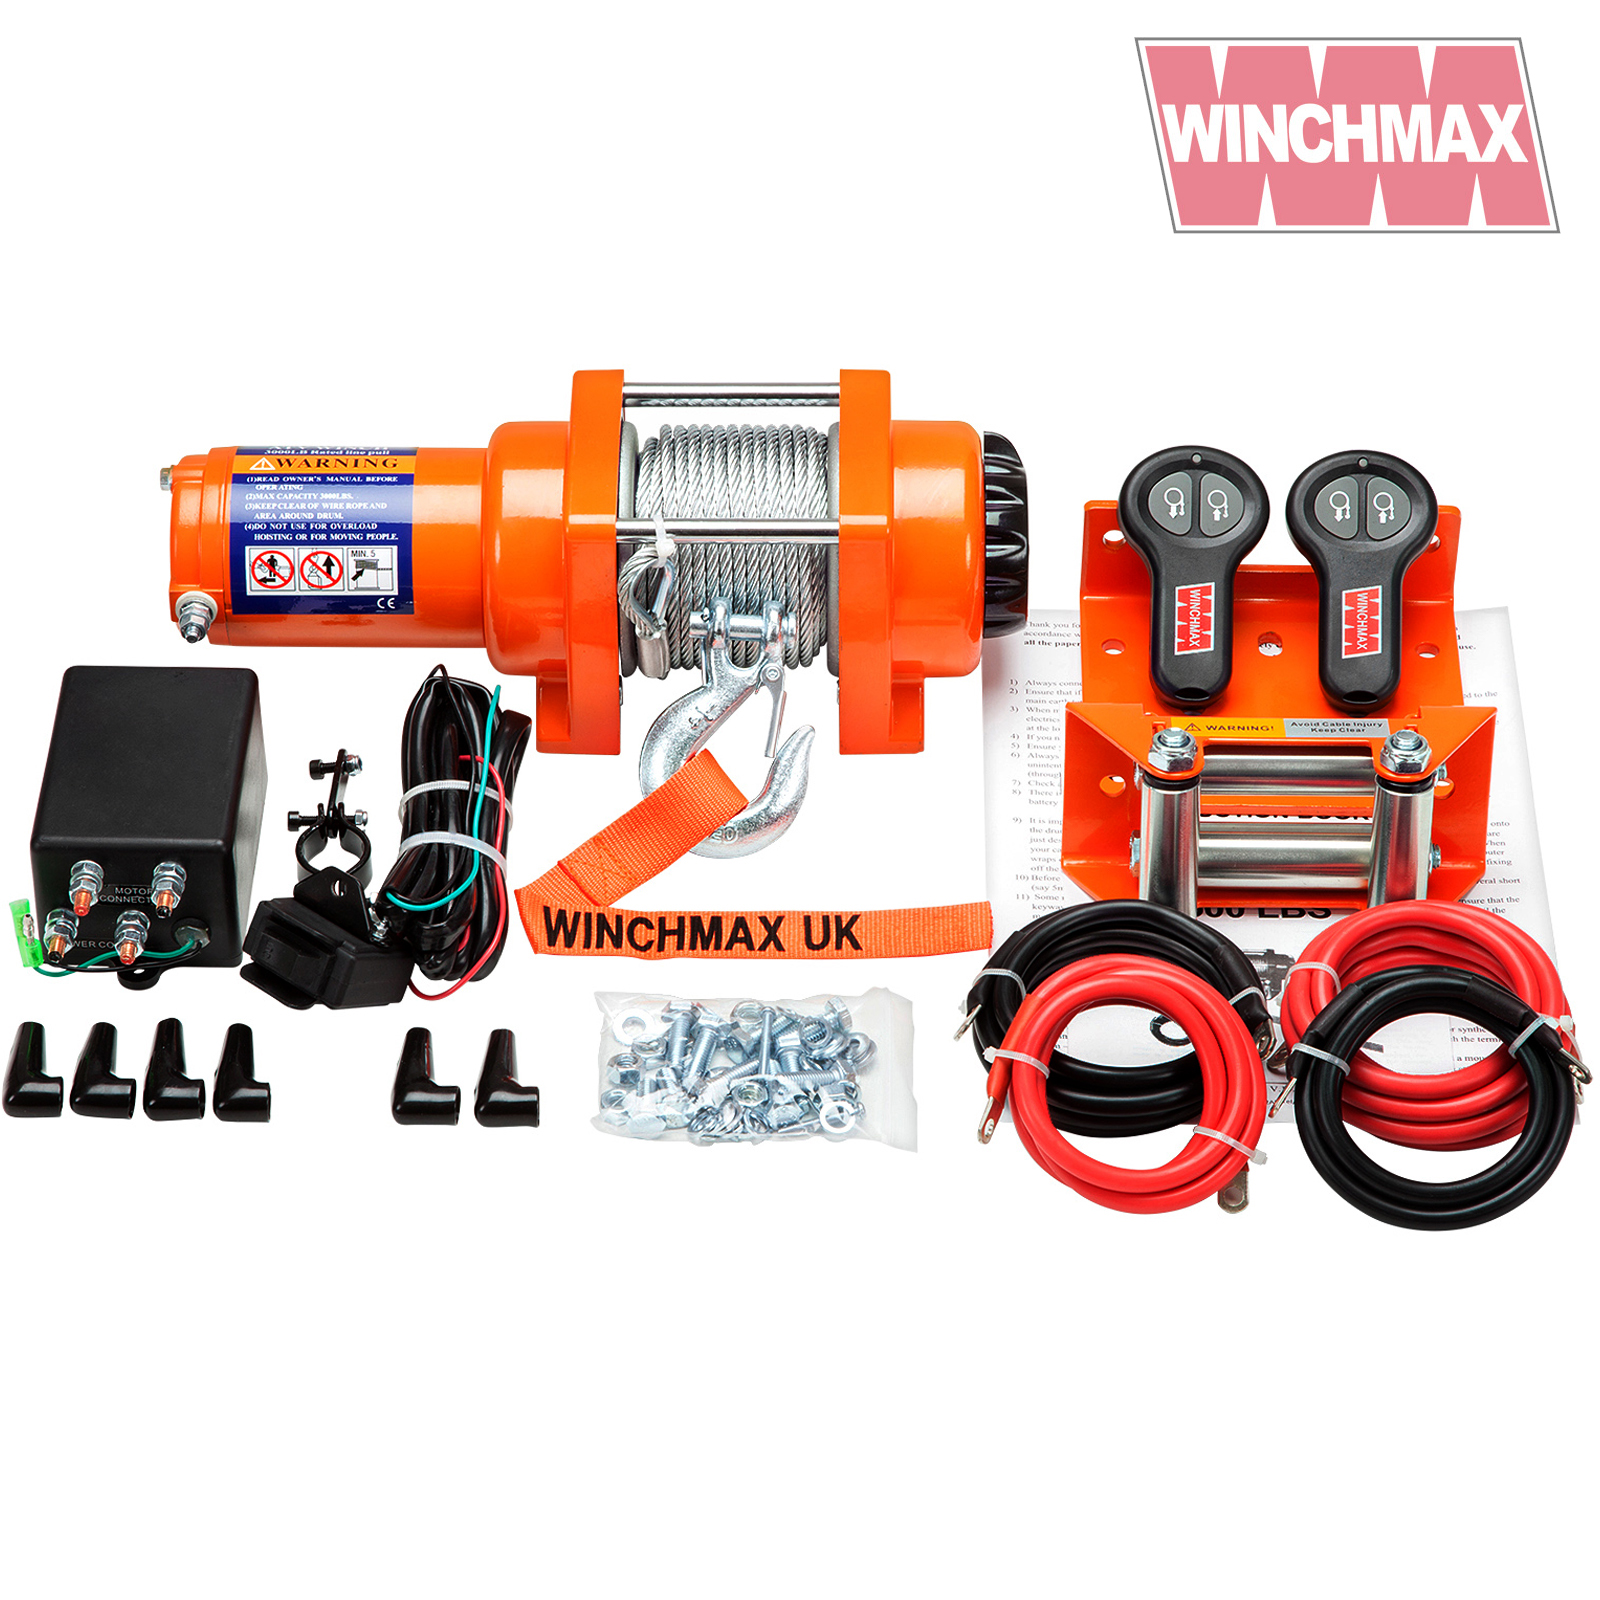 Winchmax 3000lb 12v Winch. Steel Rope and Remote Controls